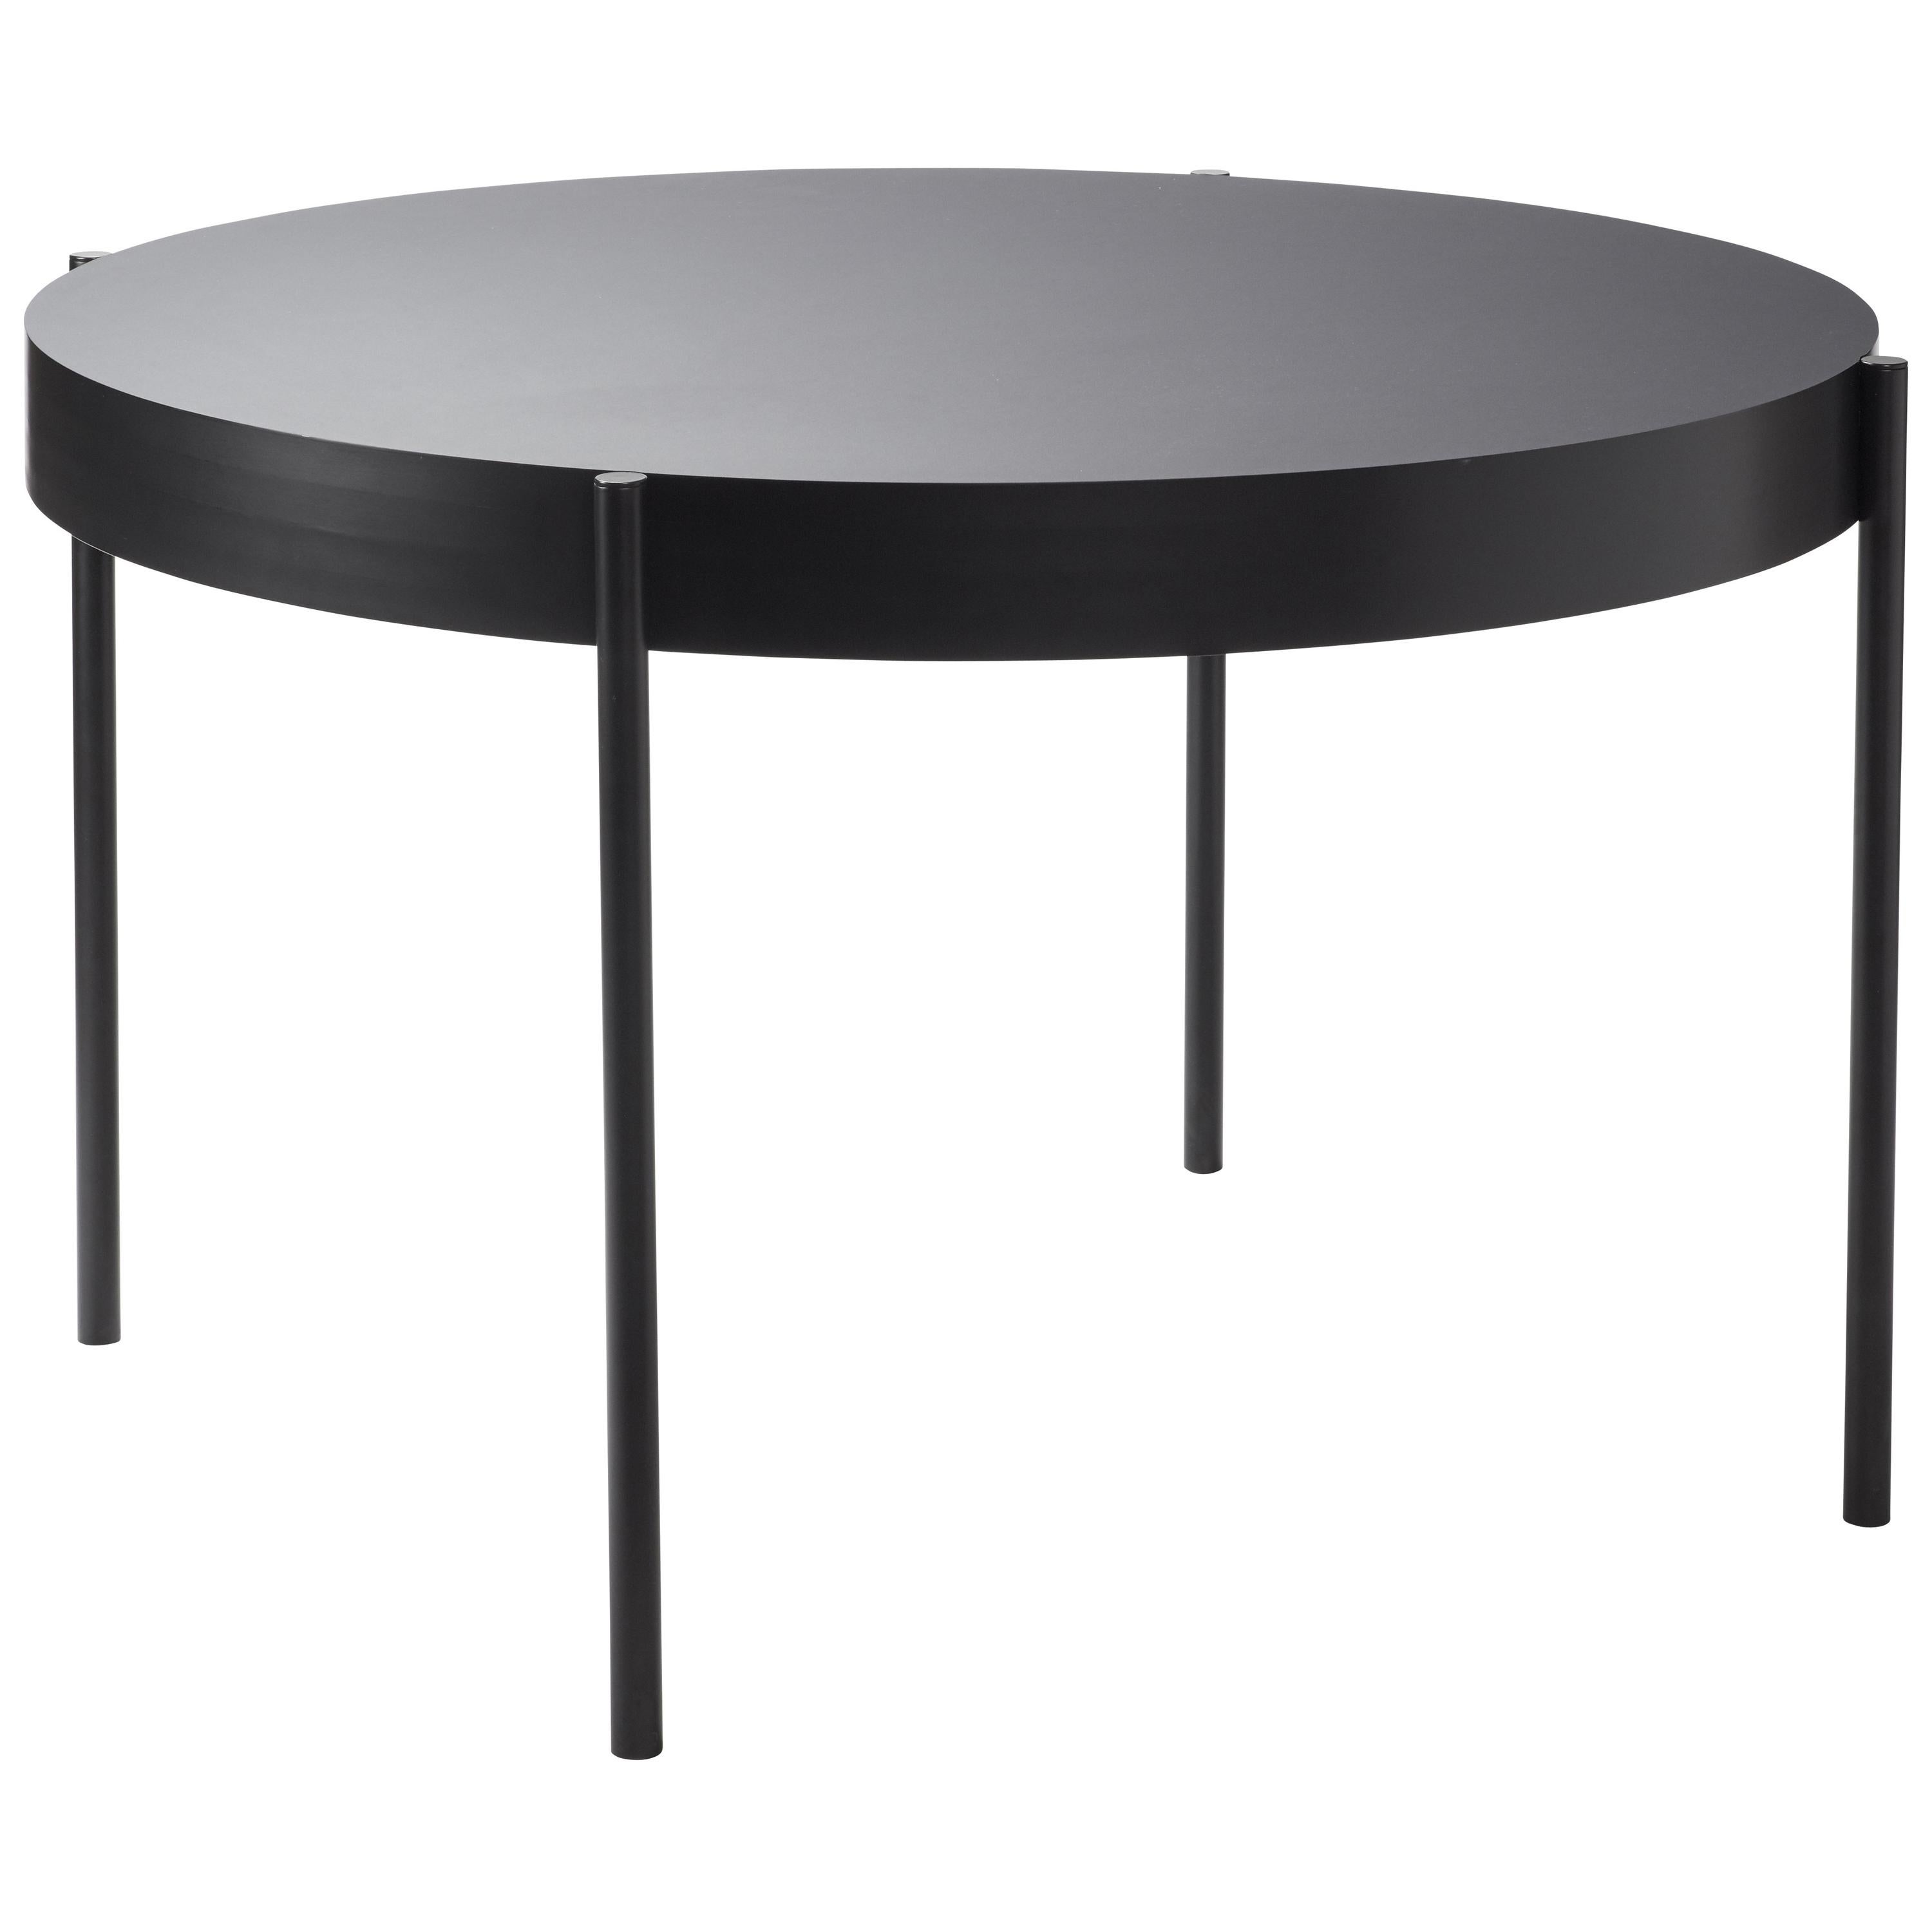 Series 430 Small Round Dining Table in Black by Verner Panton